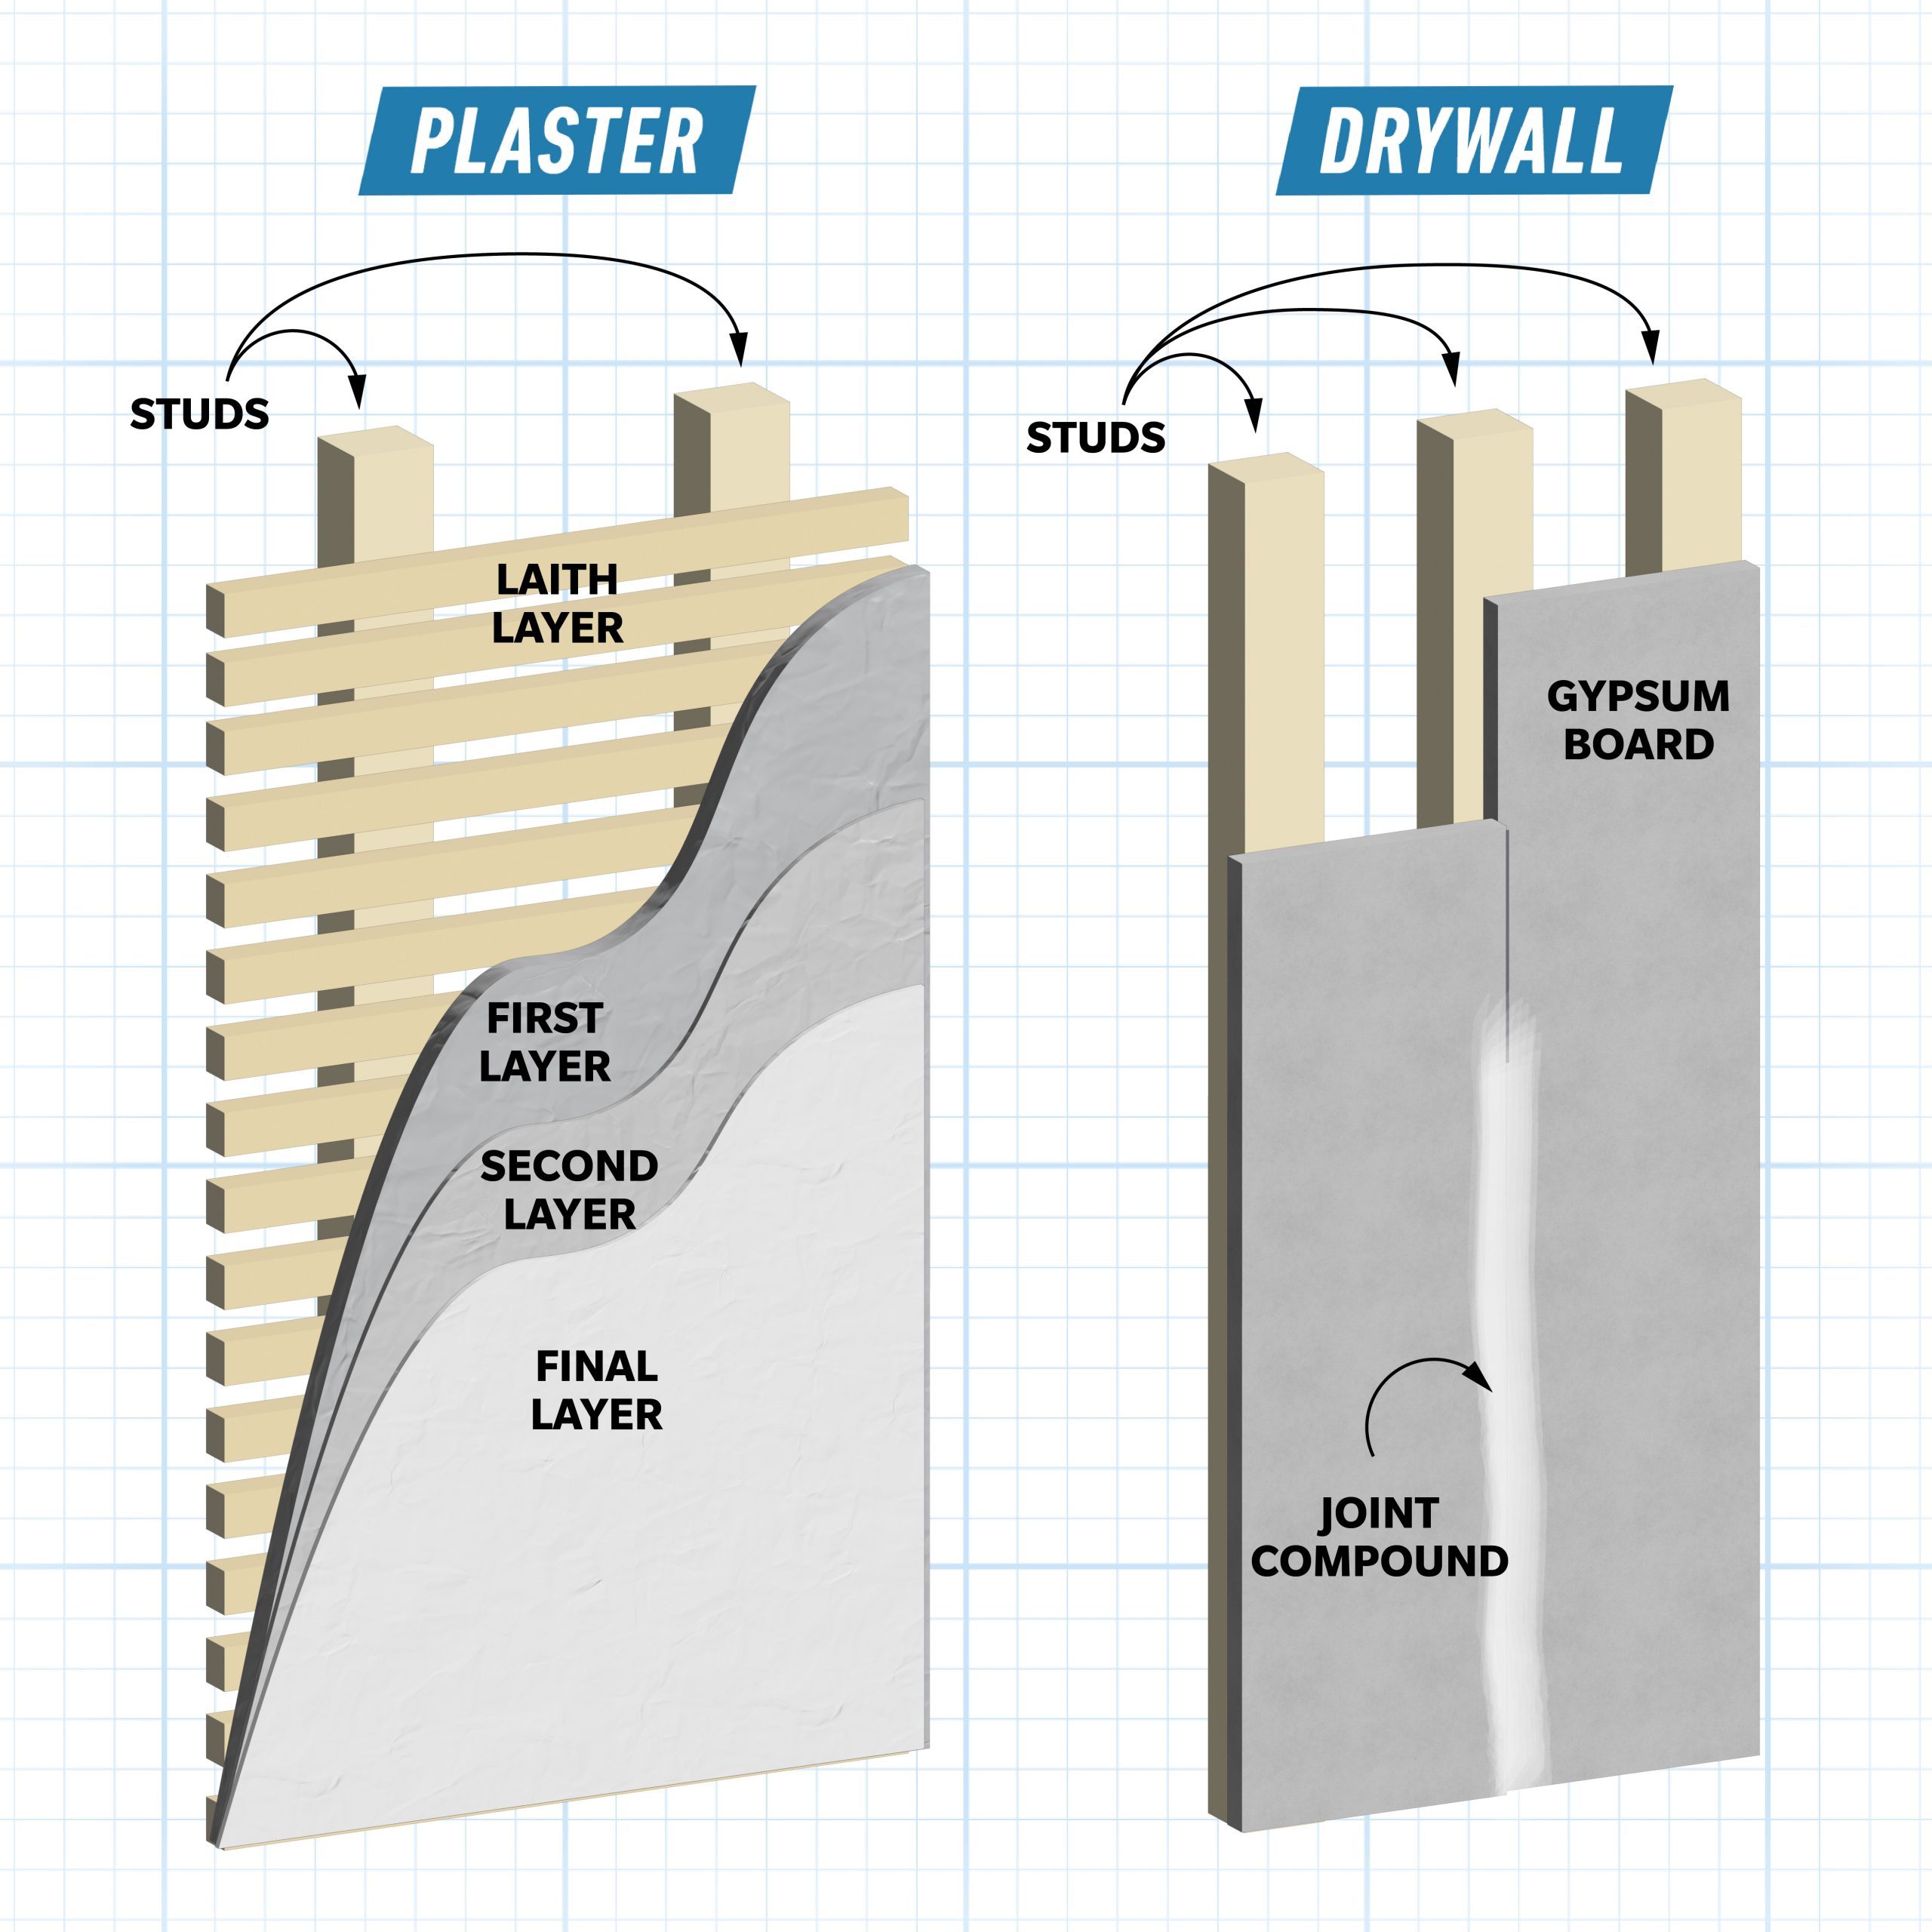 Plaster vs. Drywall: What's the Difference? | The Family Handyman